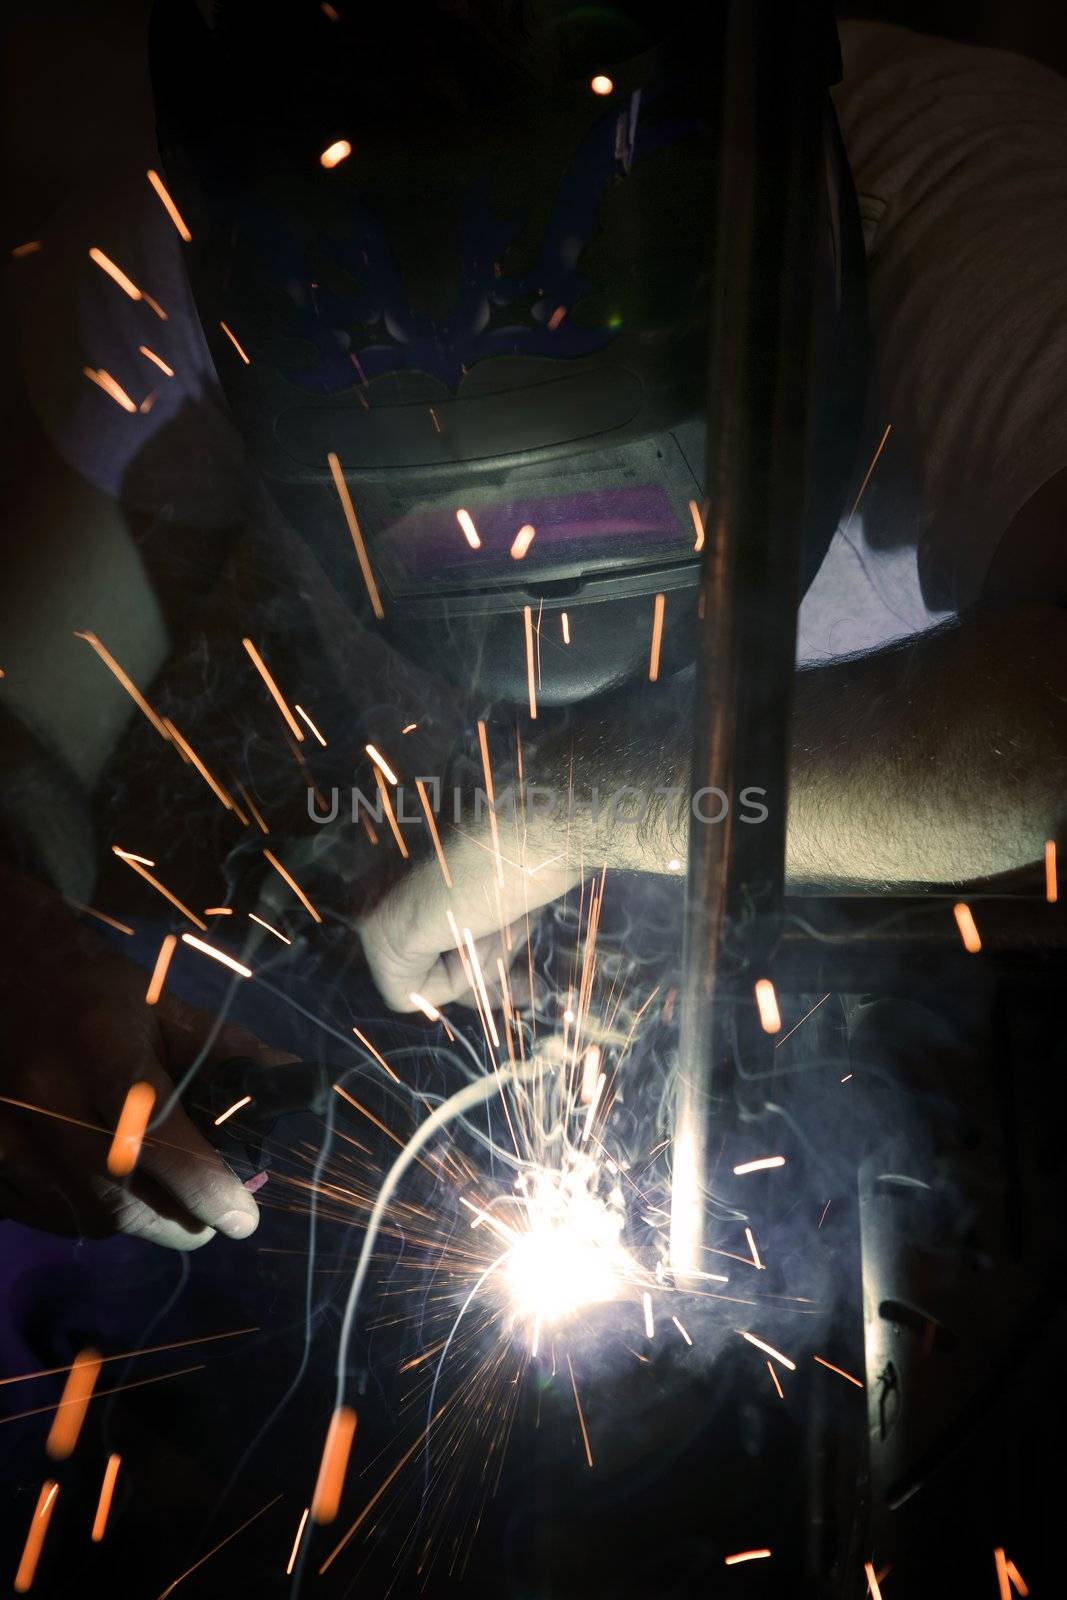 Welder working on the metal fork of a motorcycle